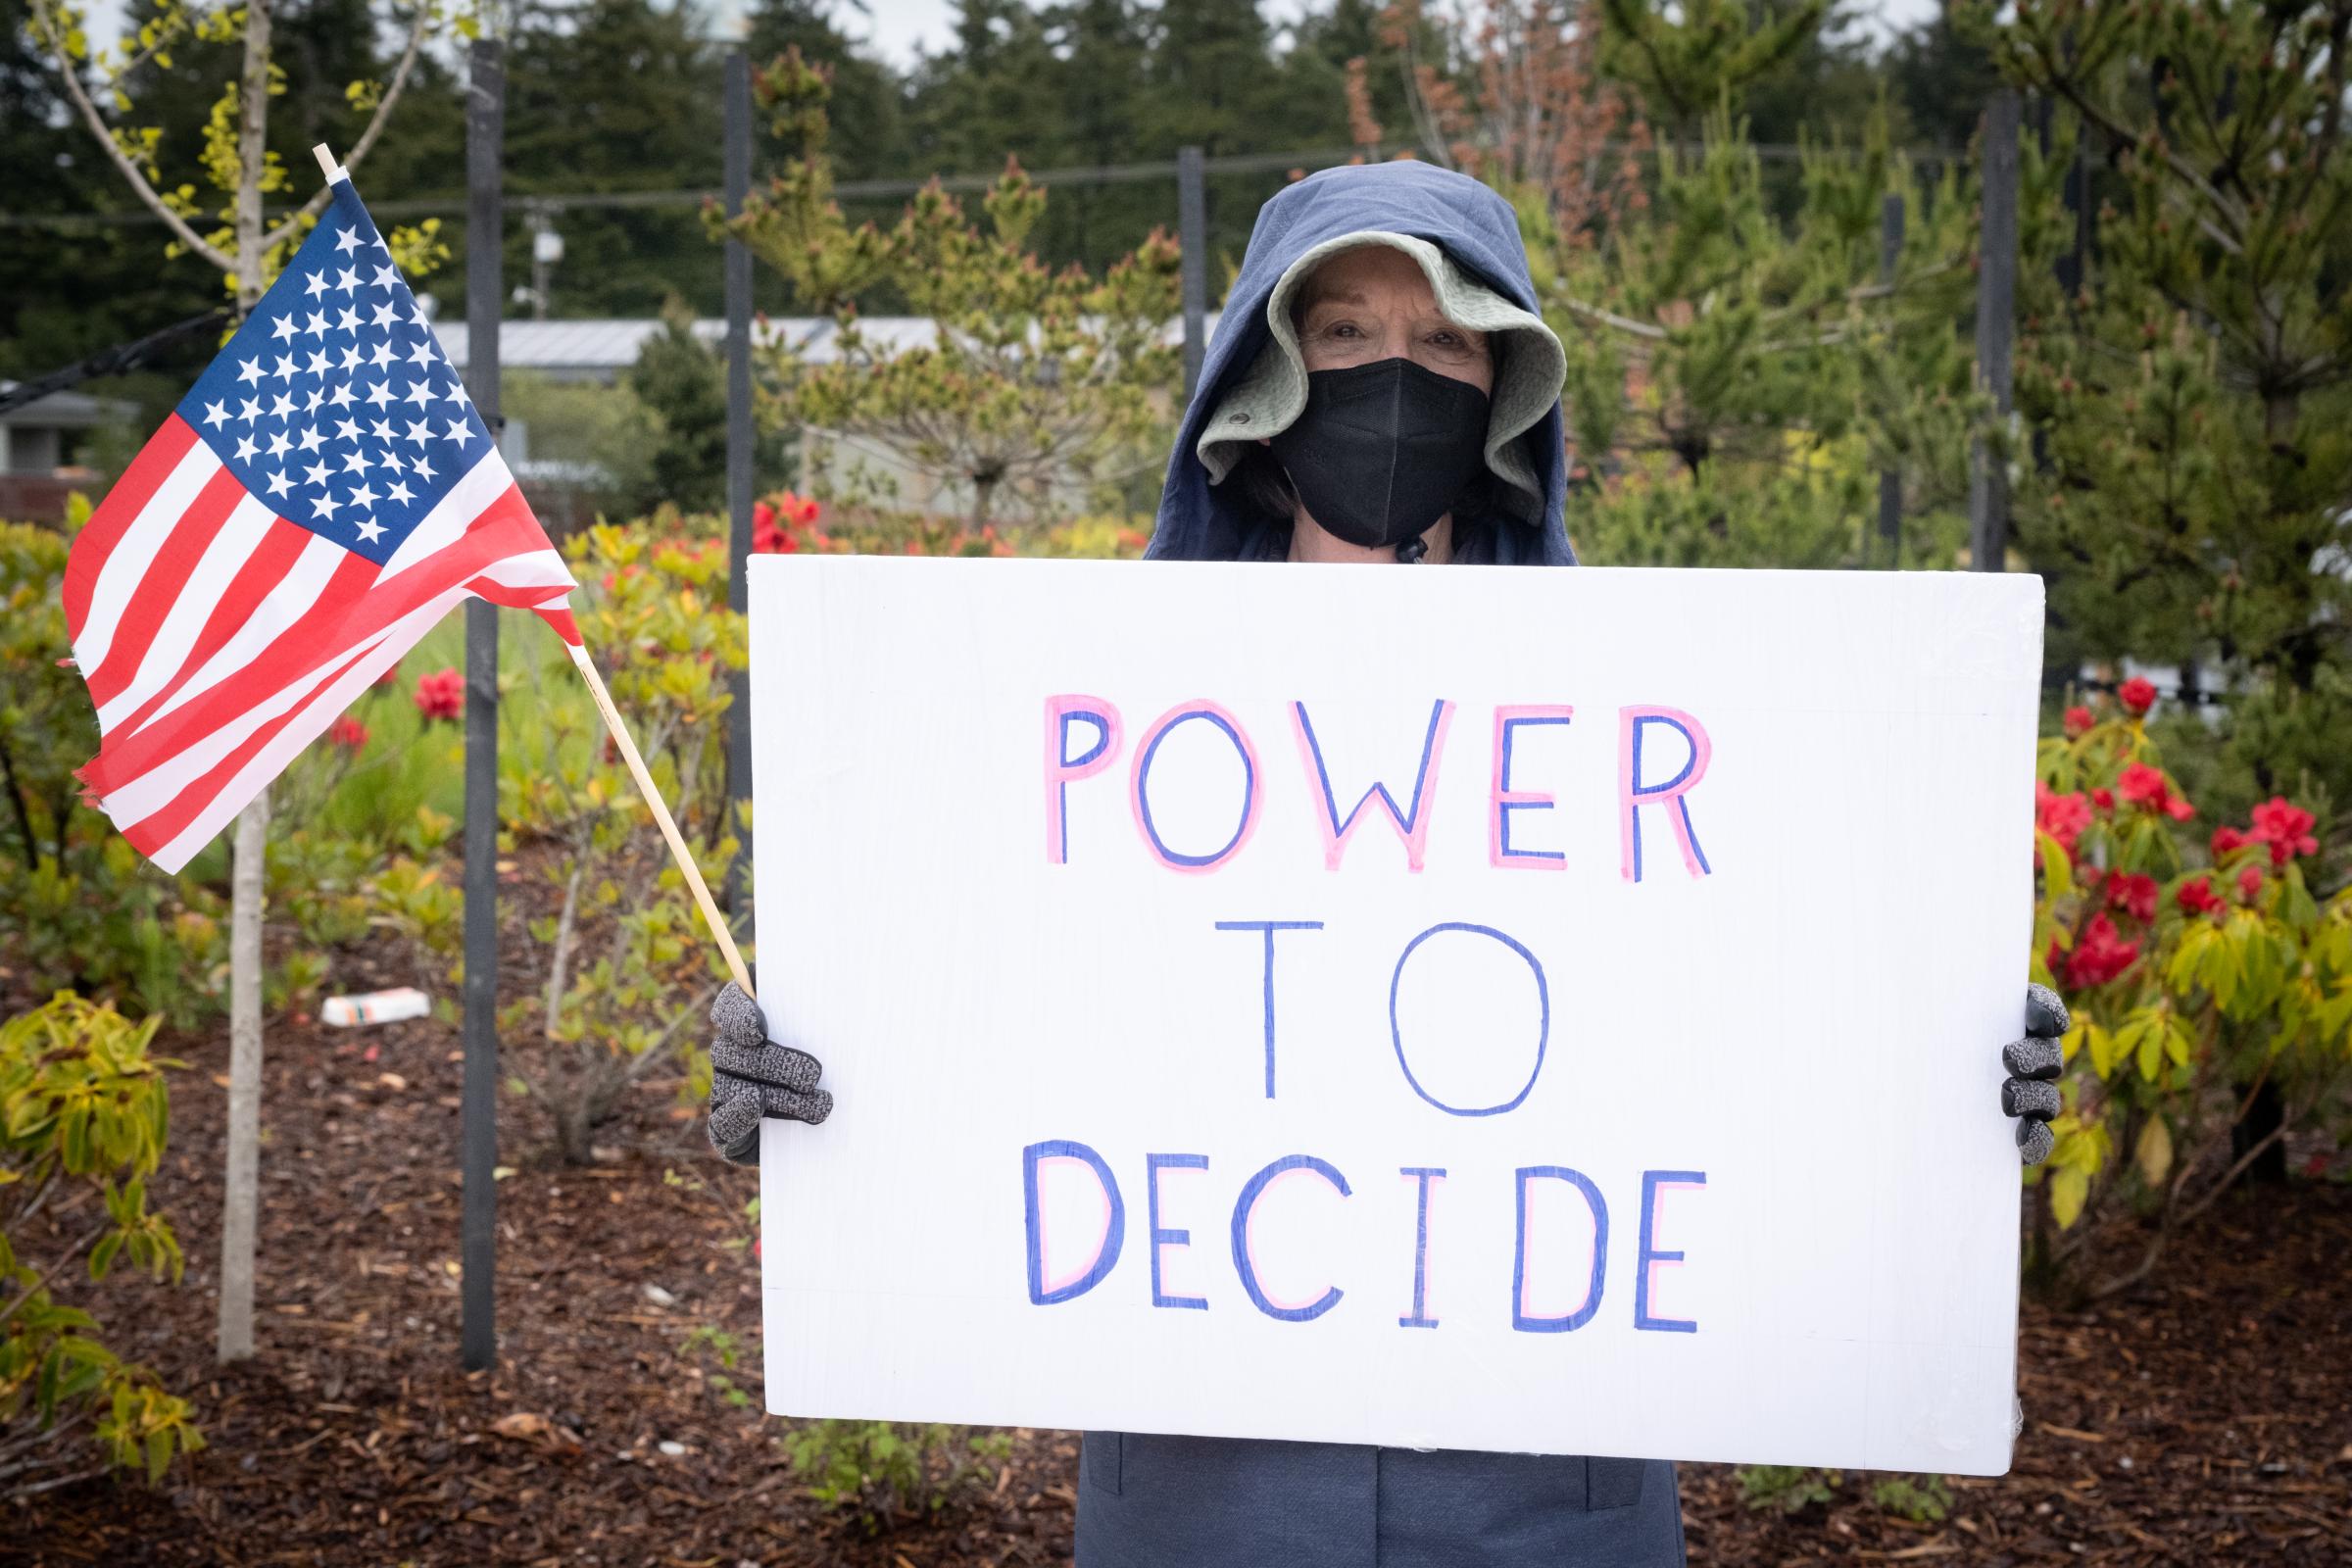 Bans Off Our Bodies Rally Florence Oregon - Woman with Power to Decide sign, Florence Oregon, May 14 2022